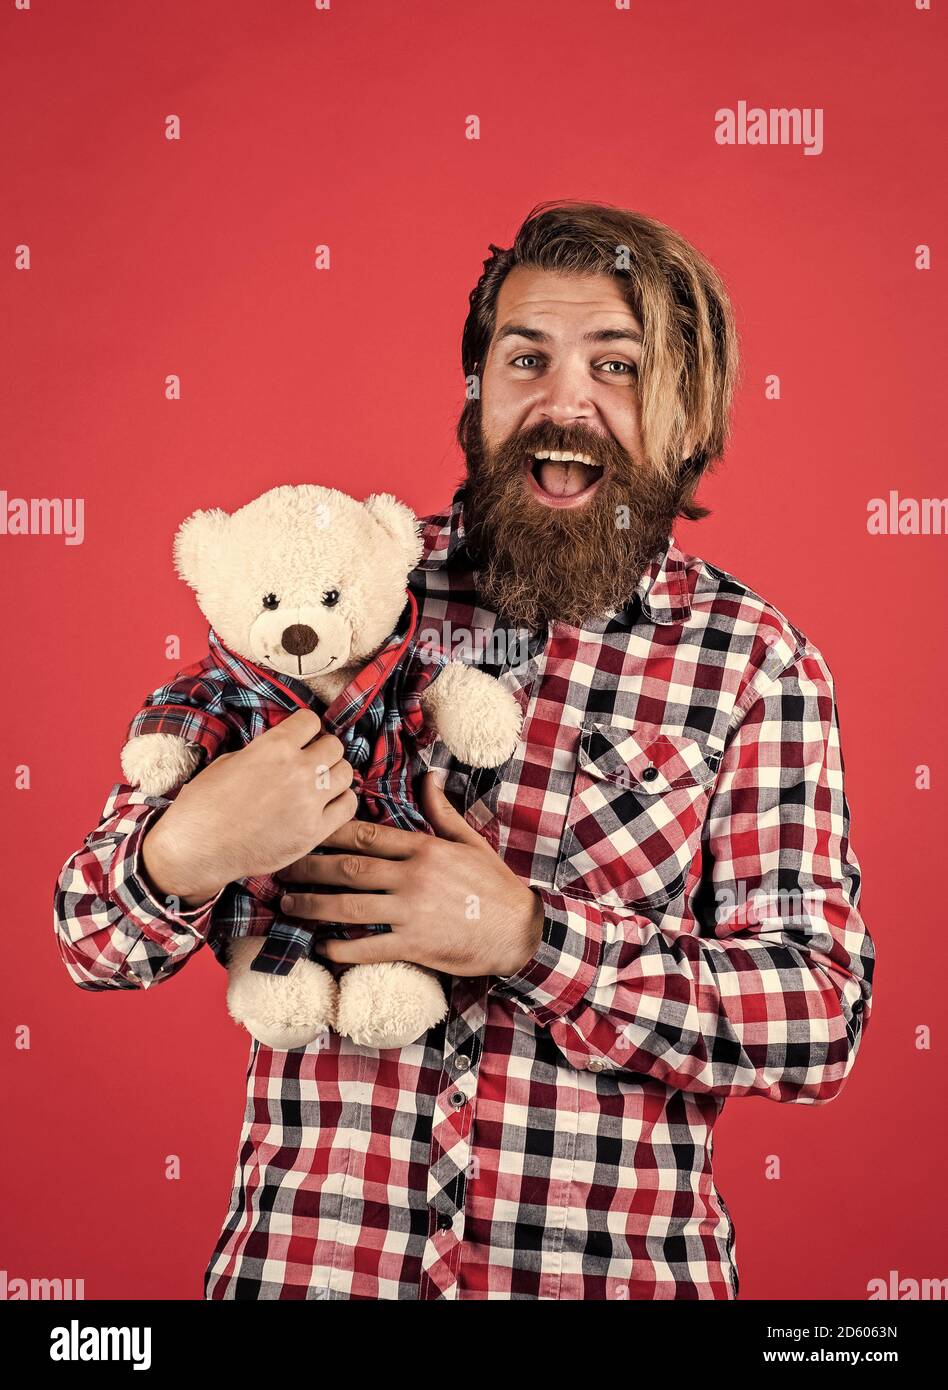 happy valentines day. cheerful bearded man hold teddy bear. male feel playful with bear. brutal mature hipster man play with toy. happy birthday. being in good mood. Stock Photo